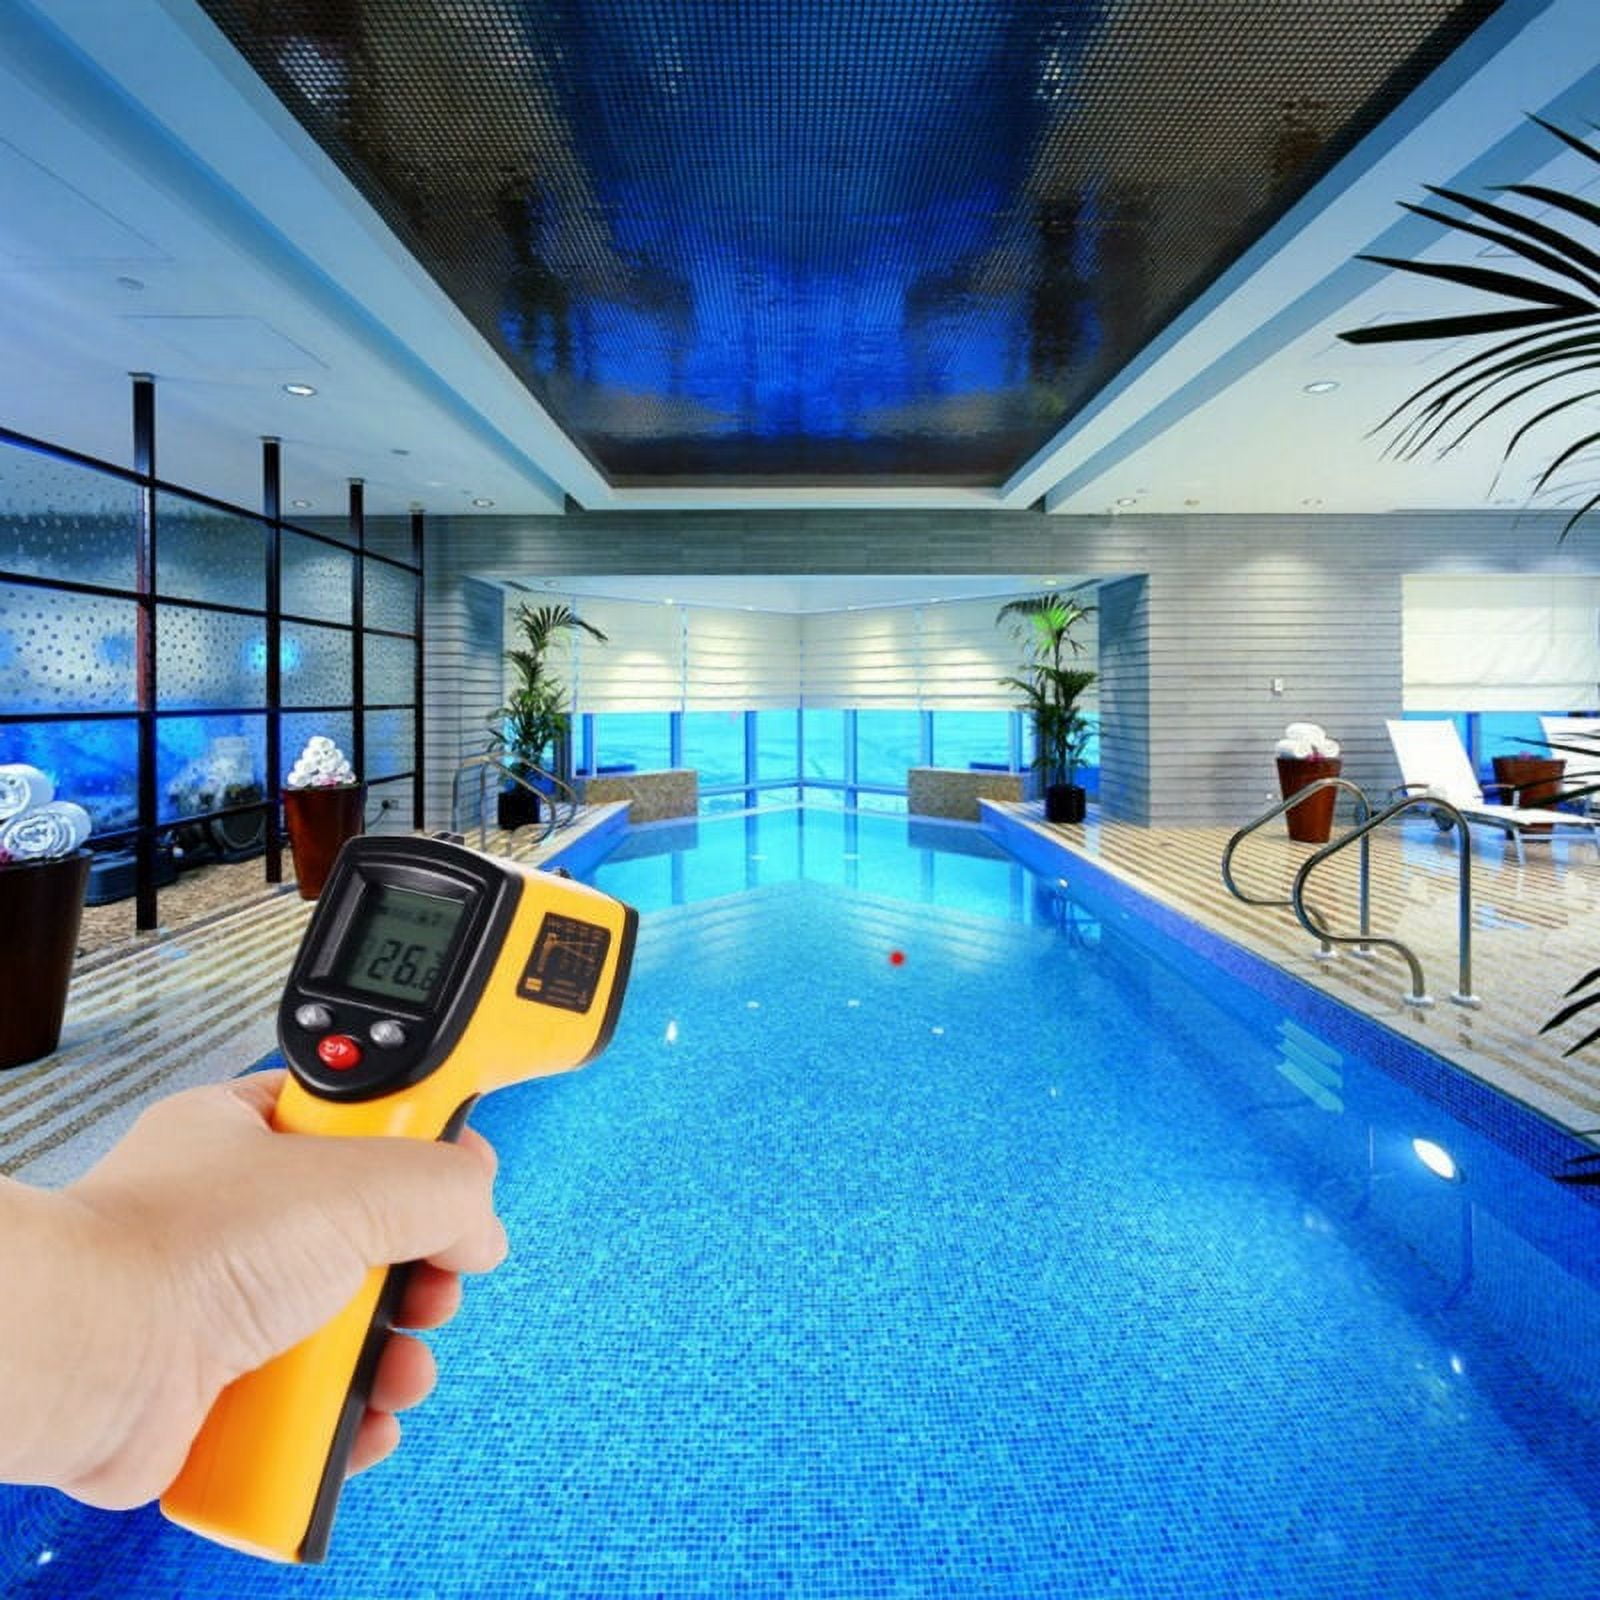 ThermoPro TP30W Digital Infrared Thermometer Gun Non Contact Laser  Temperature Gun for Pizza Oven, Grill Swimming Pool, Construction and More